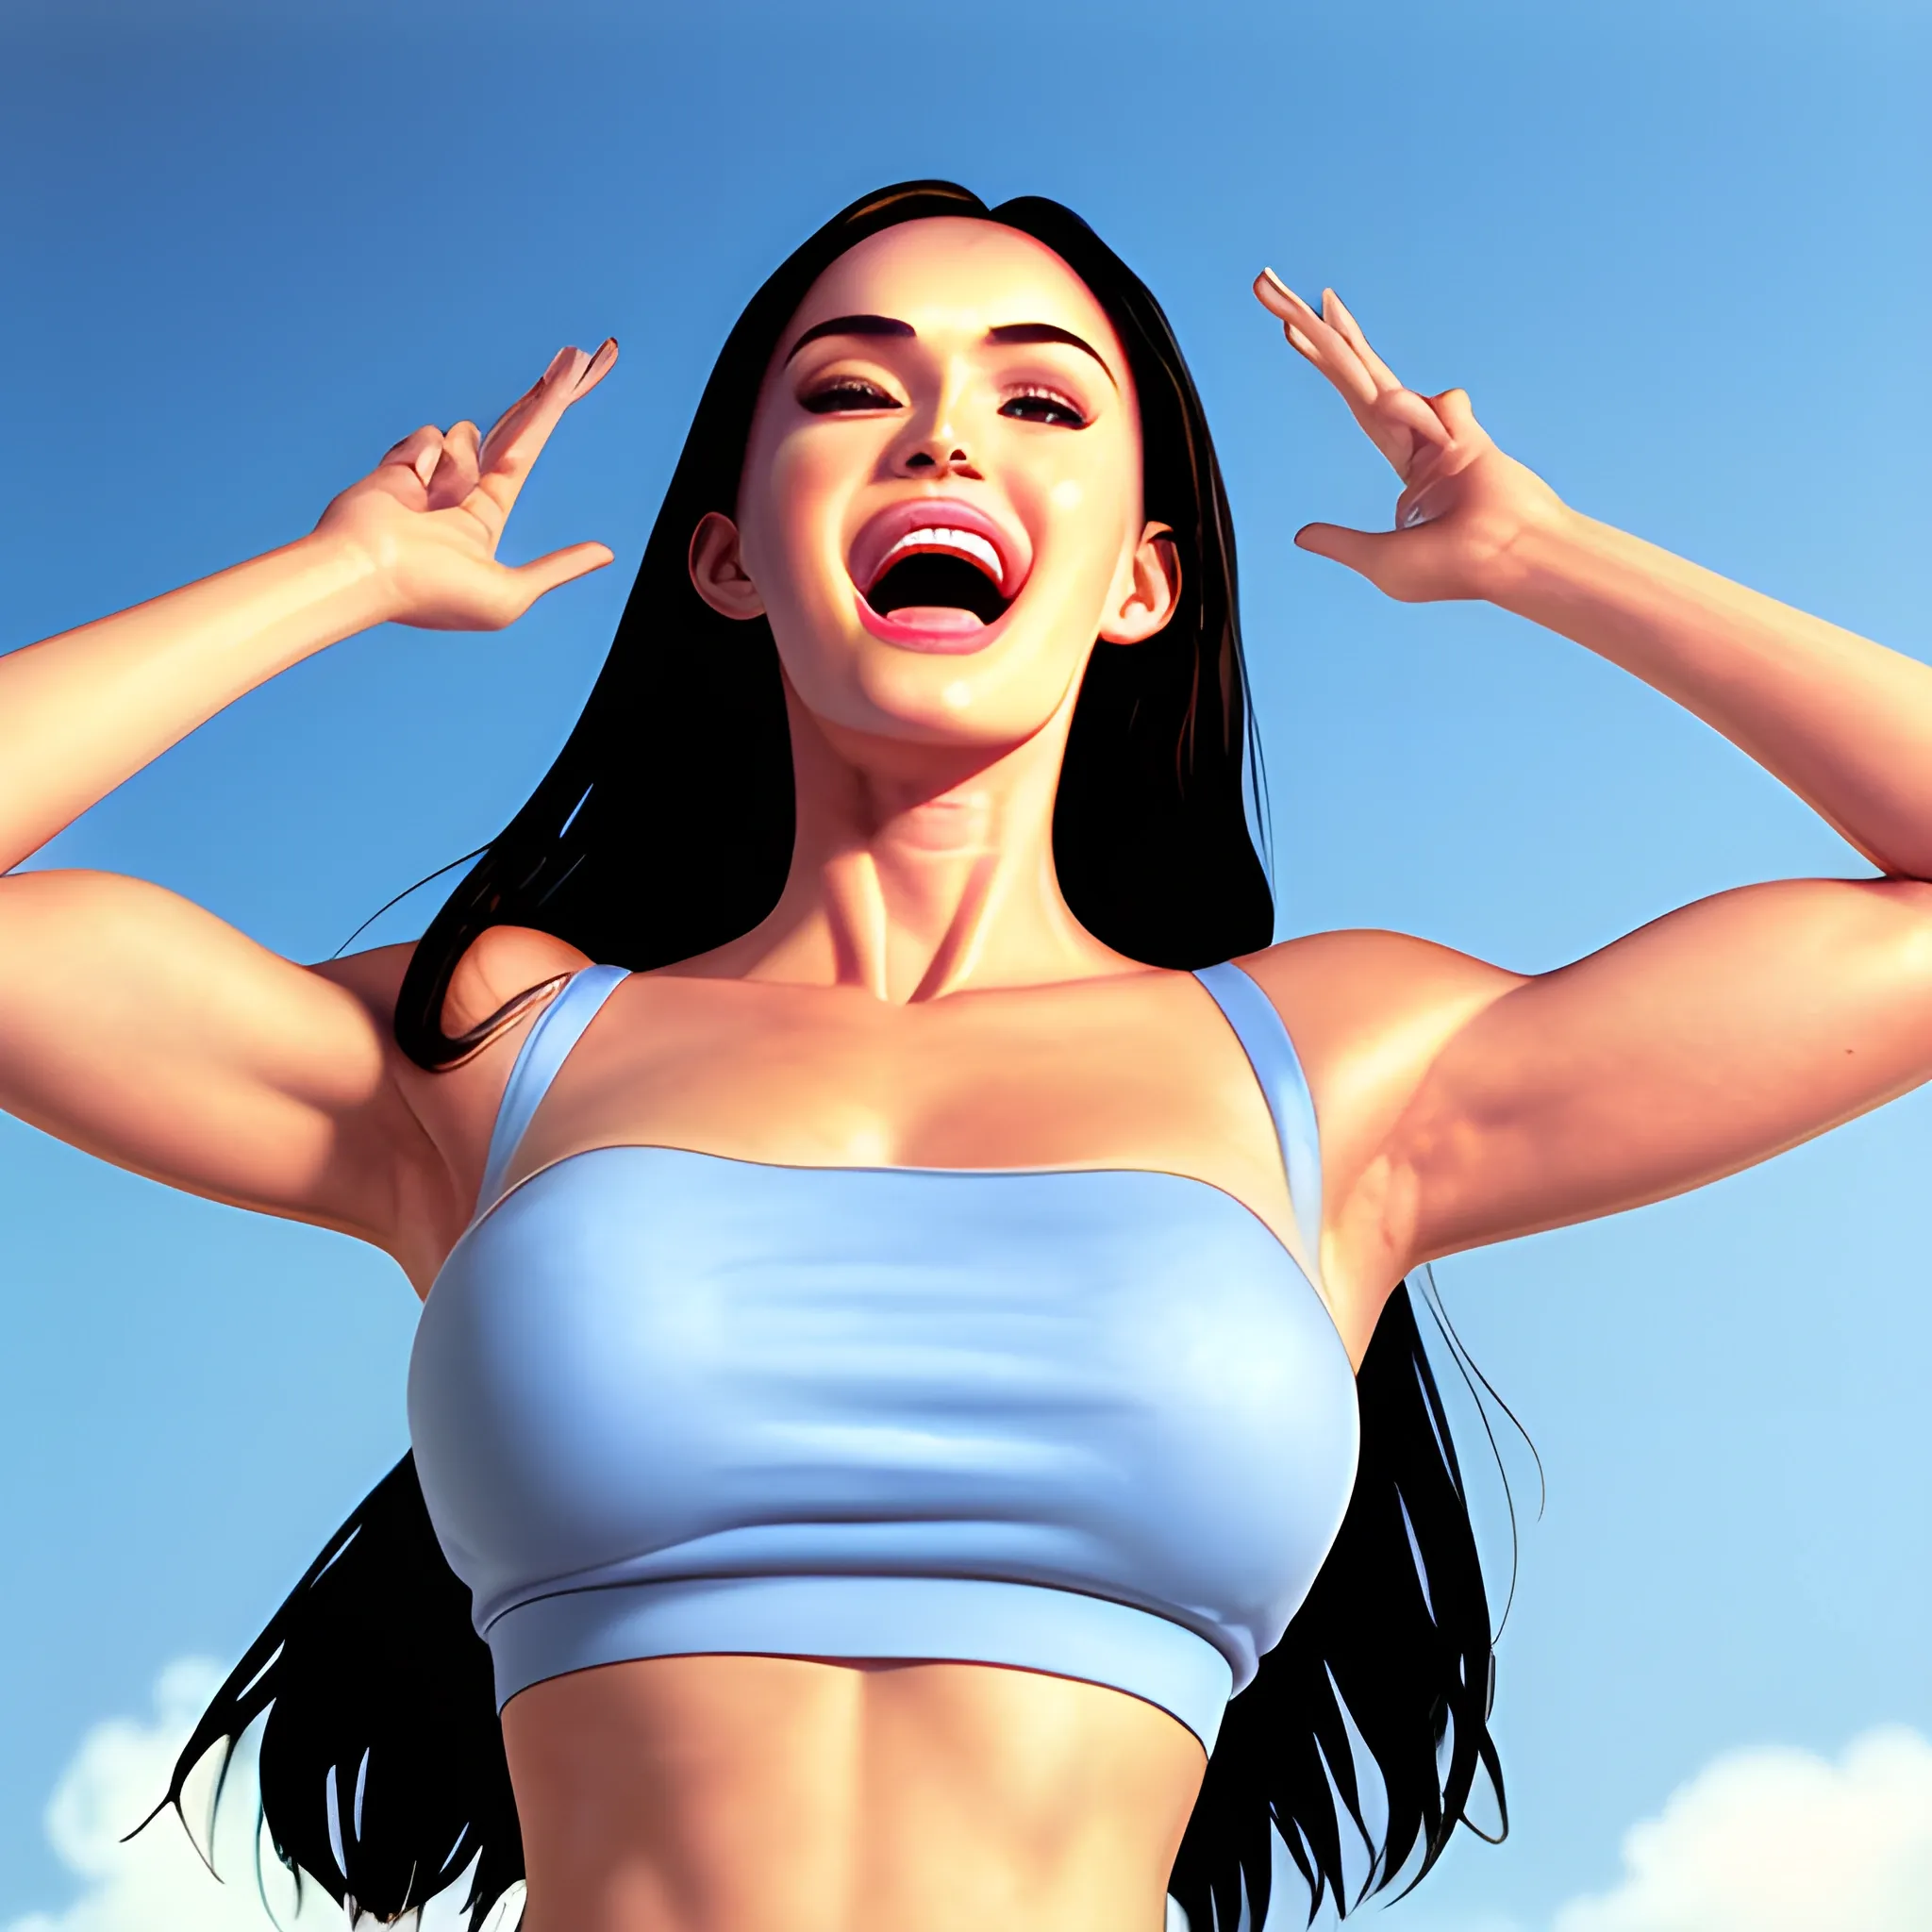 A cute 21 year old female with gigantic breasts wearing loose crop top cheerleader outfit and pleated skirt with underboob smiling with blue skies viewed ((from below)),(Megan Fox):1 Negative prompt: Asian, Bra, out of frame, lowres, error, cropped, worst quality, low quality, jpeg artifacts, ugly, duplicate, morbid, mutilated, out of frame and, extra fingers, mutated hands, poorly drawn hands, poorly drawn face, mutation, deformed, blurry, dehydrated, bad anatomy, bad proportions, extra limbs, cloned face, disfigured, gross proportions, malformed limbs, missing arms, missing legs, extra arms, extra legs, fused fingers, too many fingers, long neck, username, watermark, signature